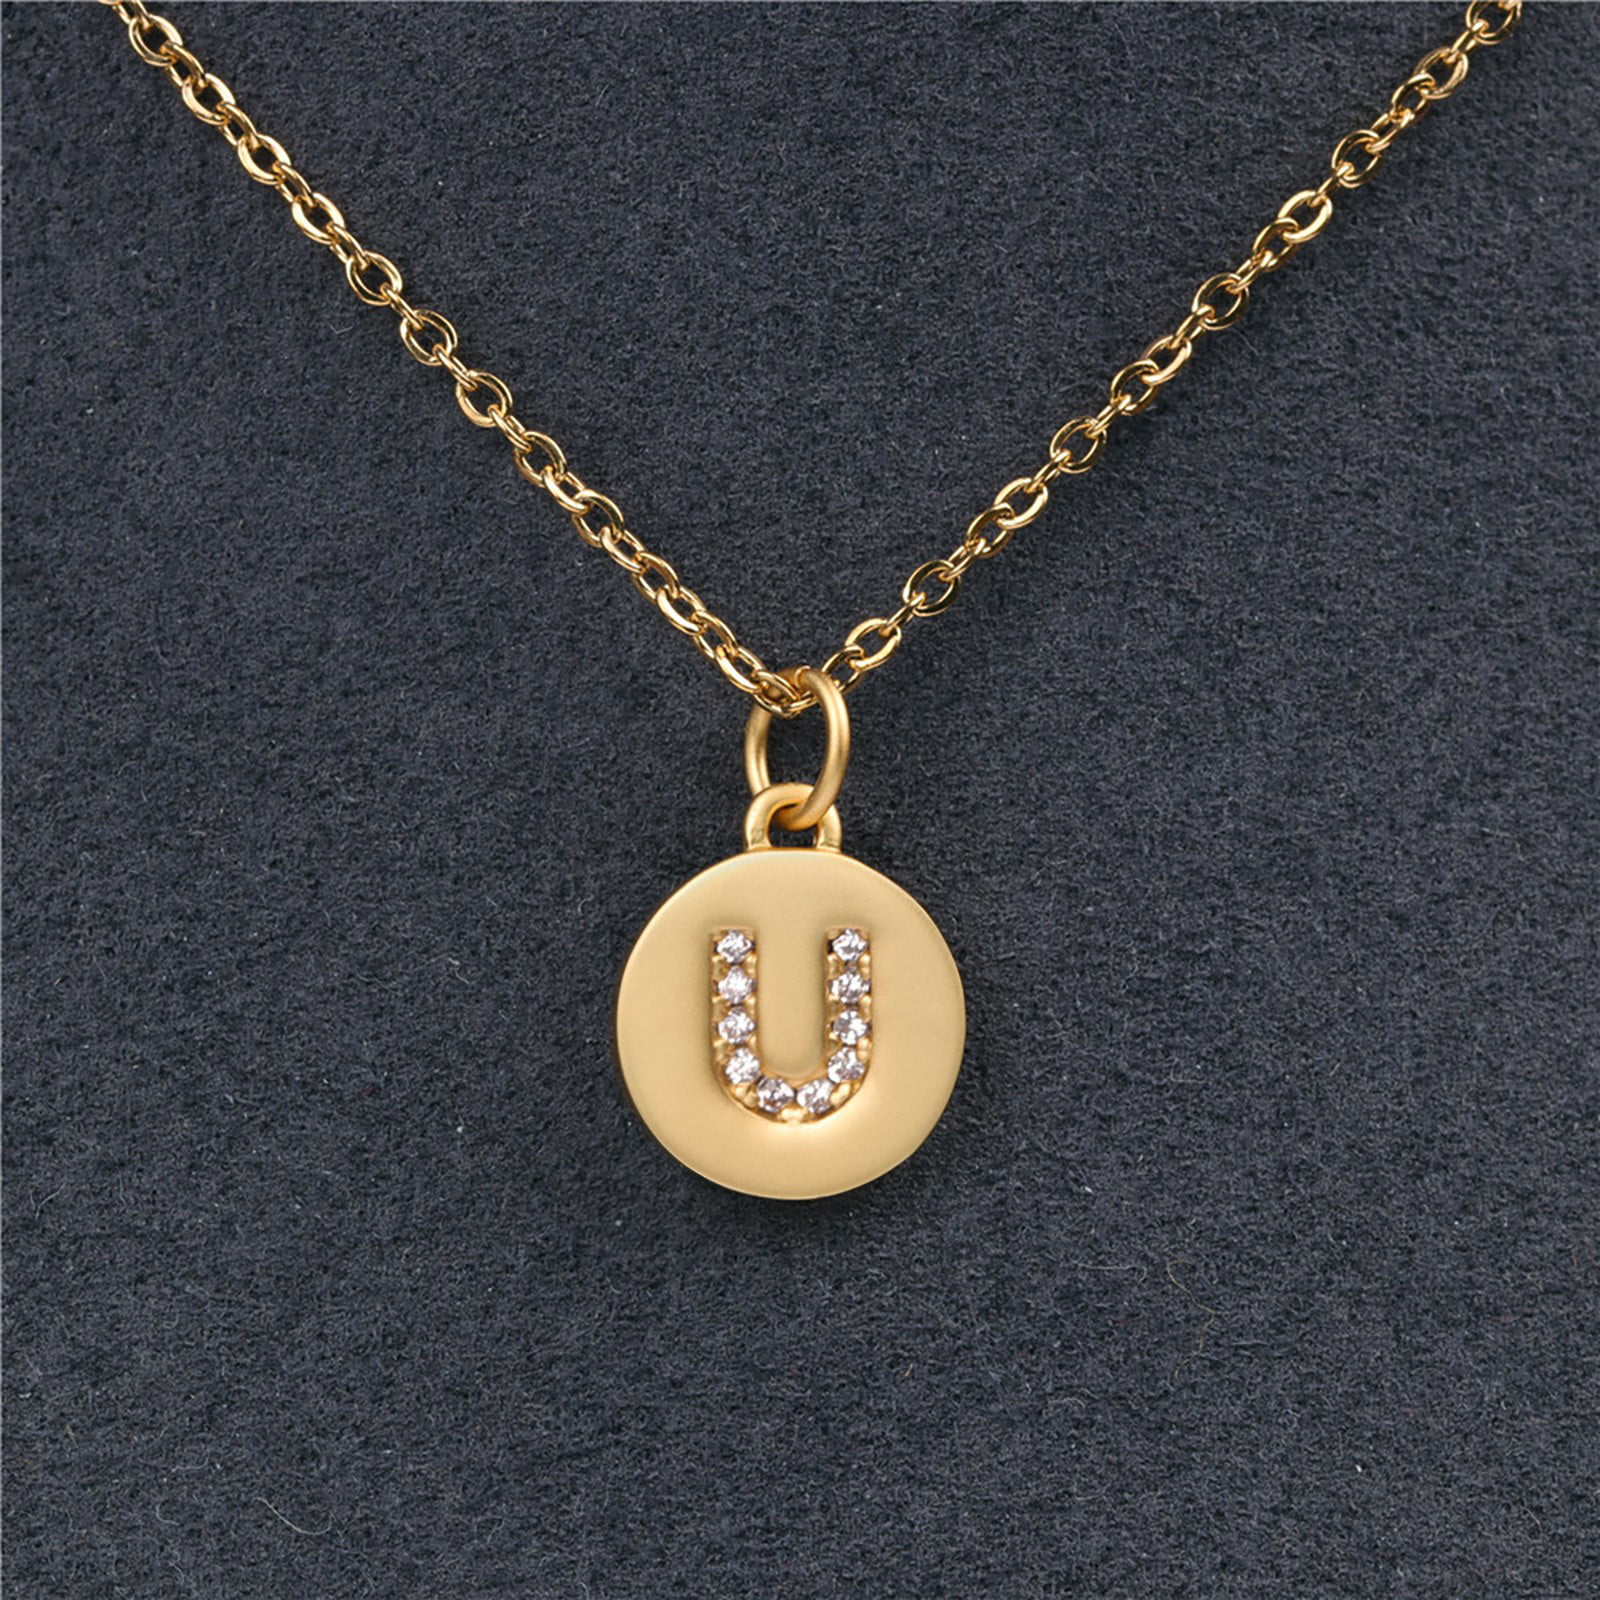 Hammered Necklace Initial Gold Filled Necklace Everyday Necklace Oval Disc Jewelry Personalized Gold Oval Necklace